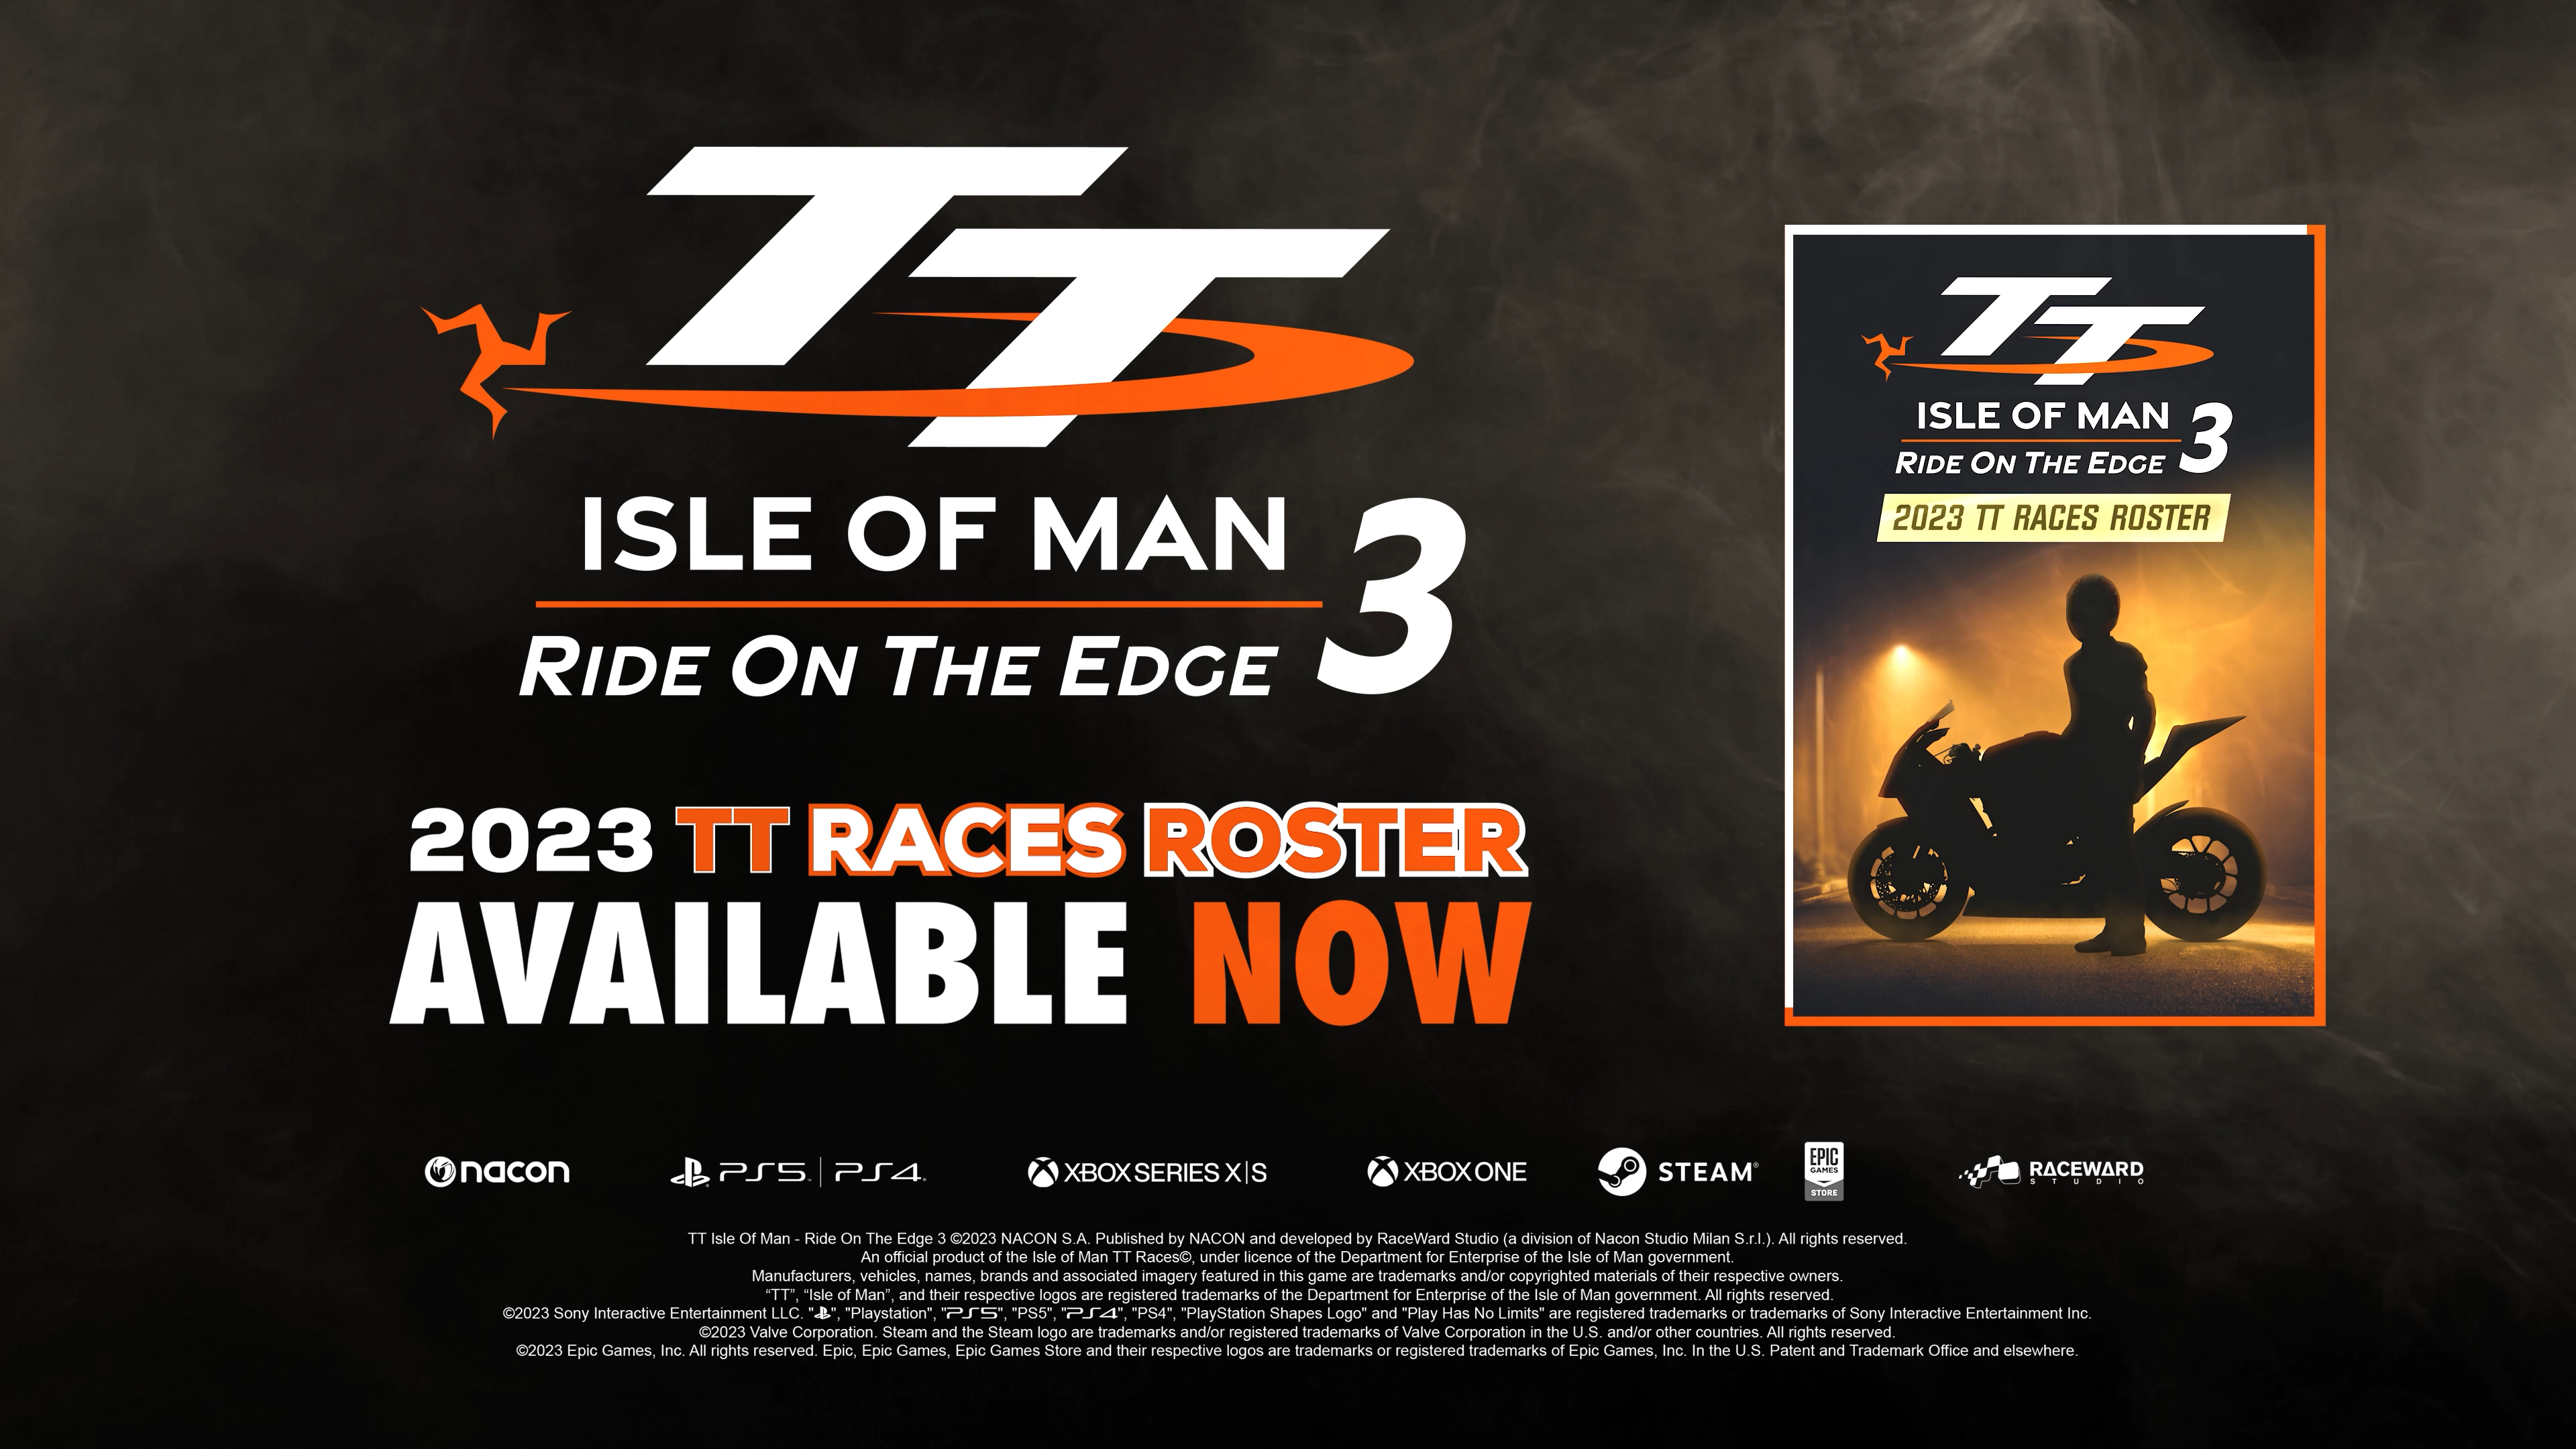 TT Isle Of Man: Ride on the Edge 3 | 2023 TT Races Roster AVAILABLE NOW